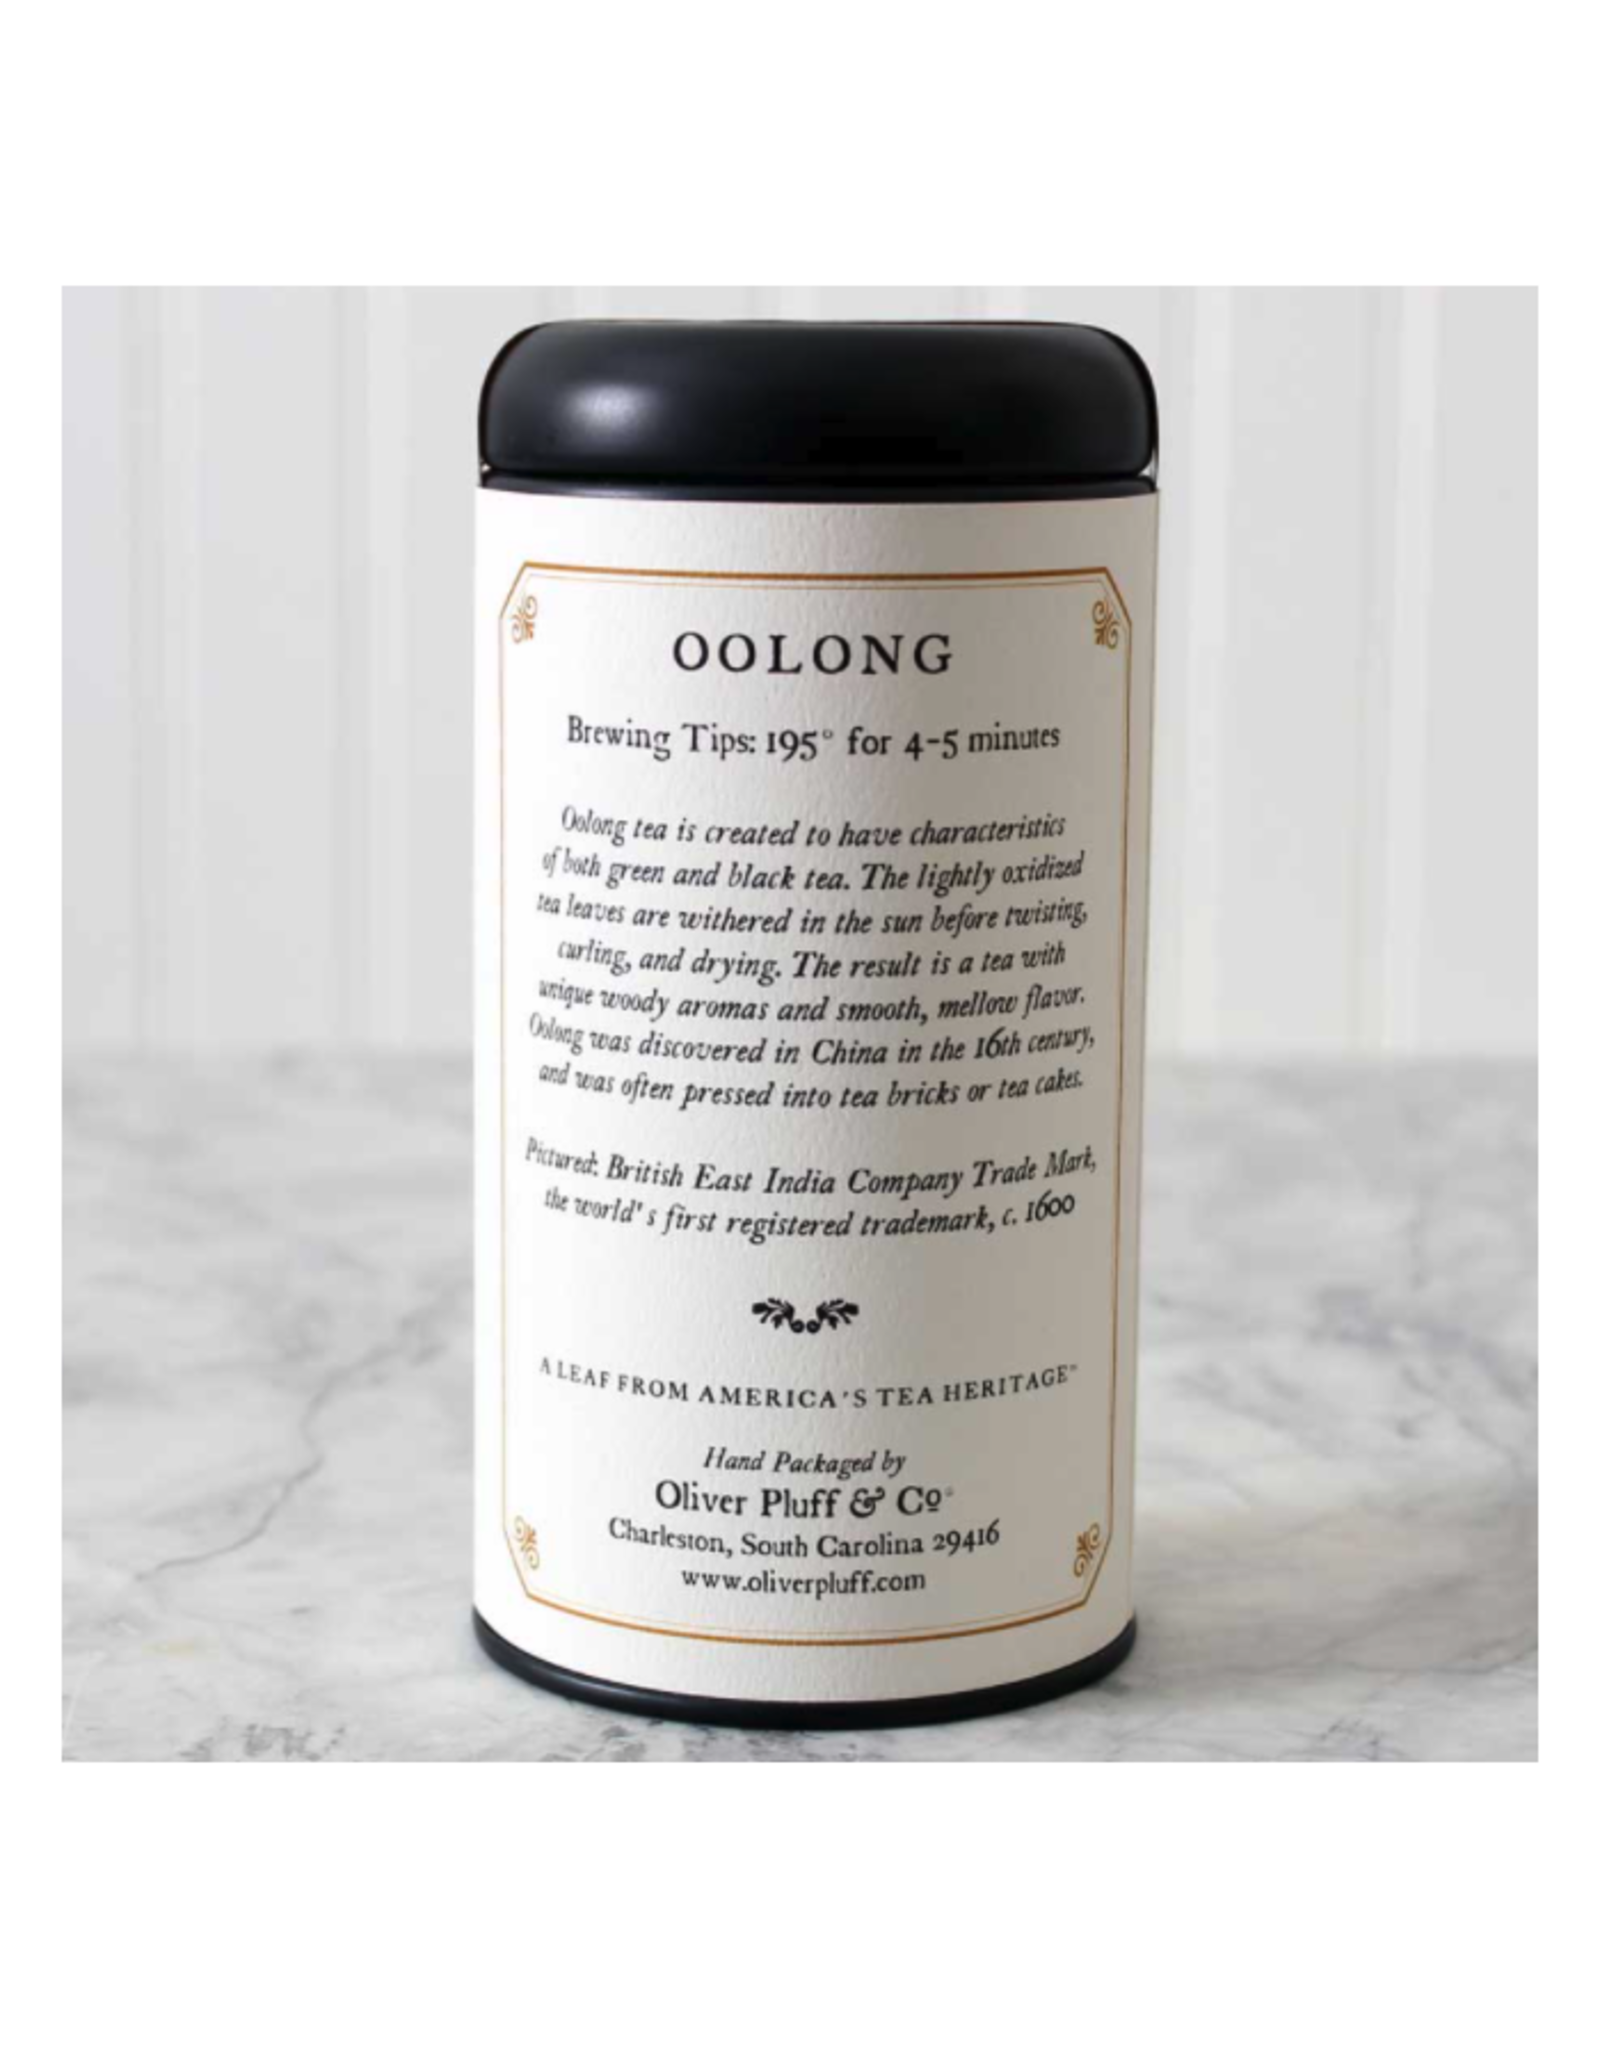 Oliver Pluff & Co. Loose Oolong Tea in Tin